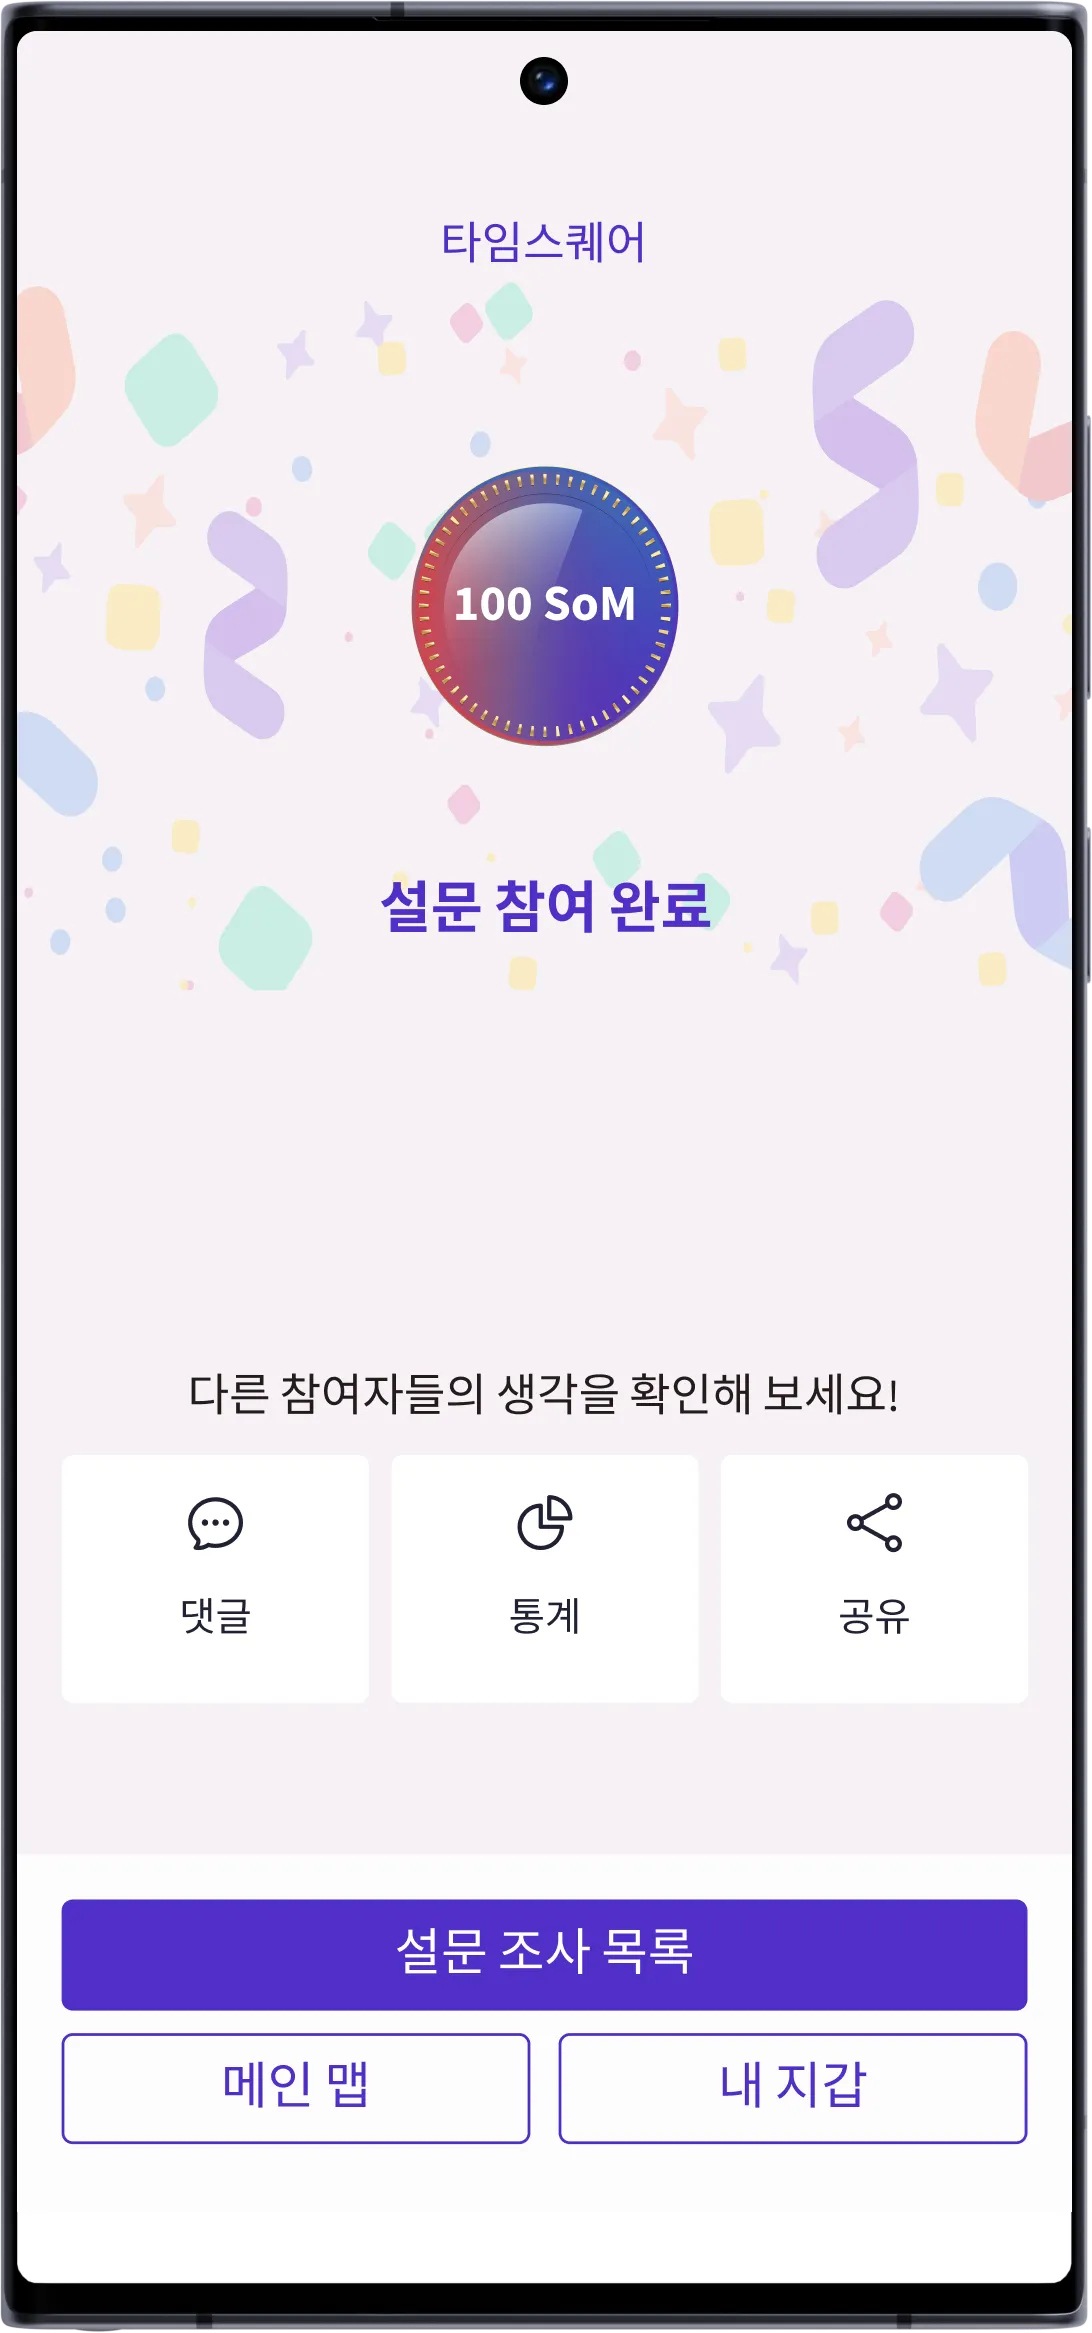 FingeRate App Screenshot of getting rewarded for survey participation